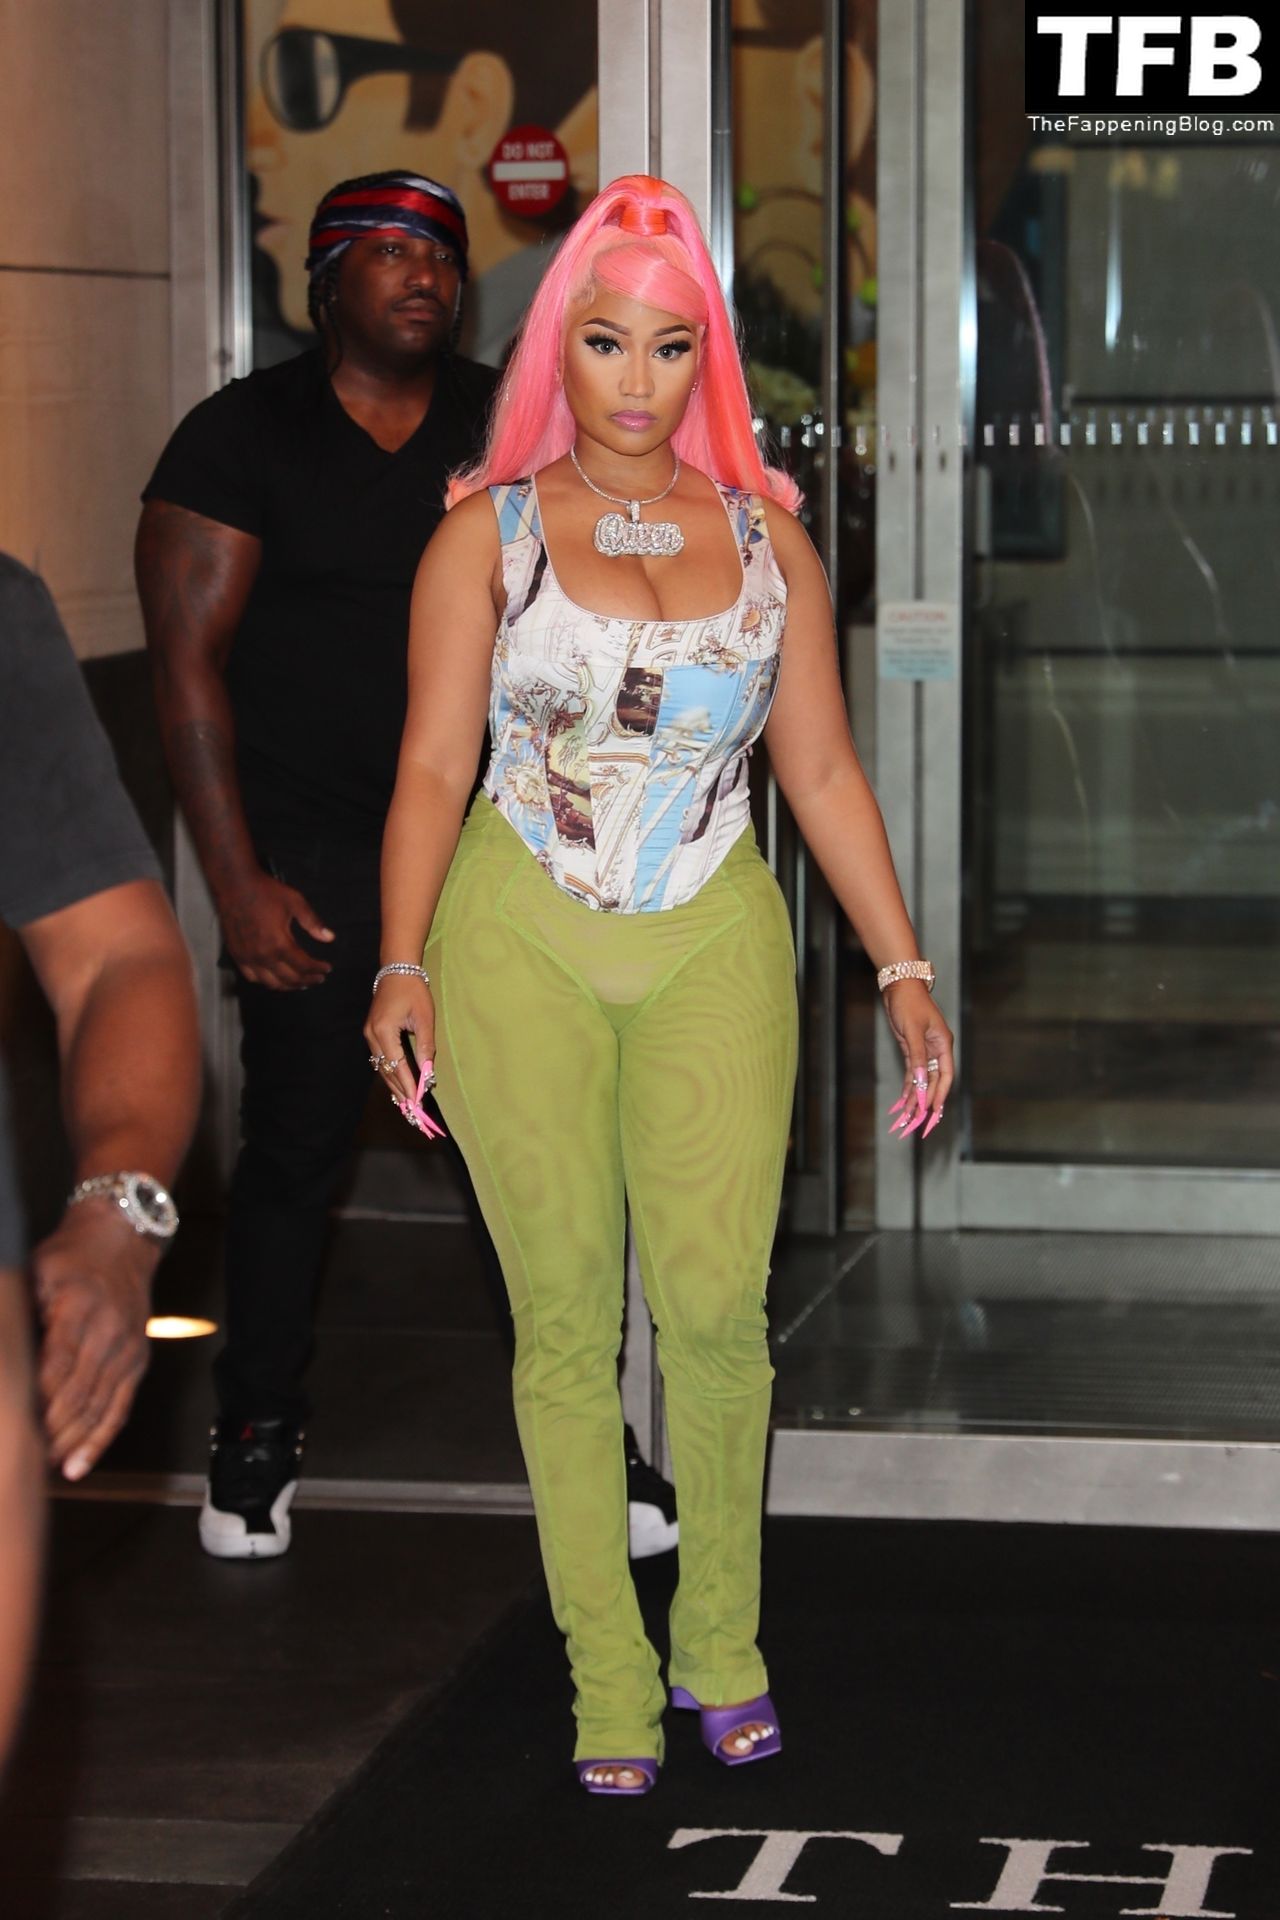 Nicki Minaj Sexy The Fappening Blog 31 - Nicki Minaj Checks Out of Her Hotel After Her Epic Night at the MTV VMA’s in NYC (38 Photos)